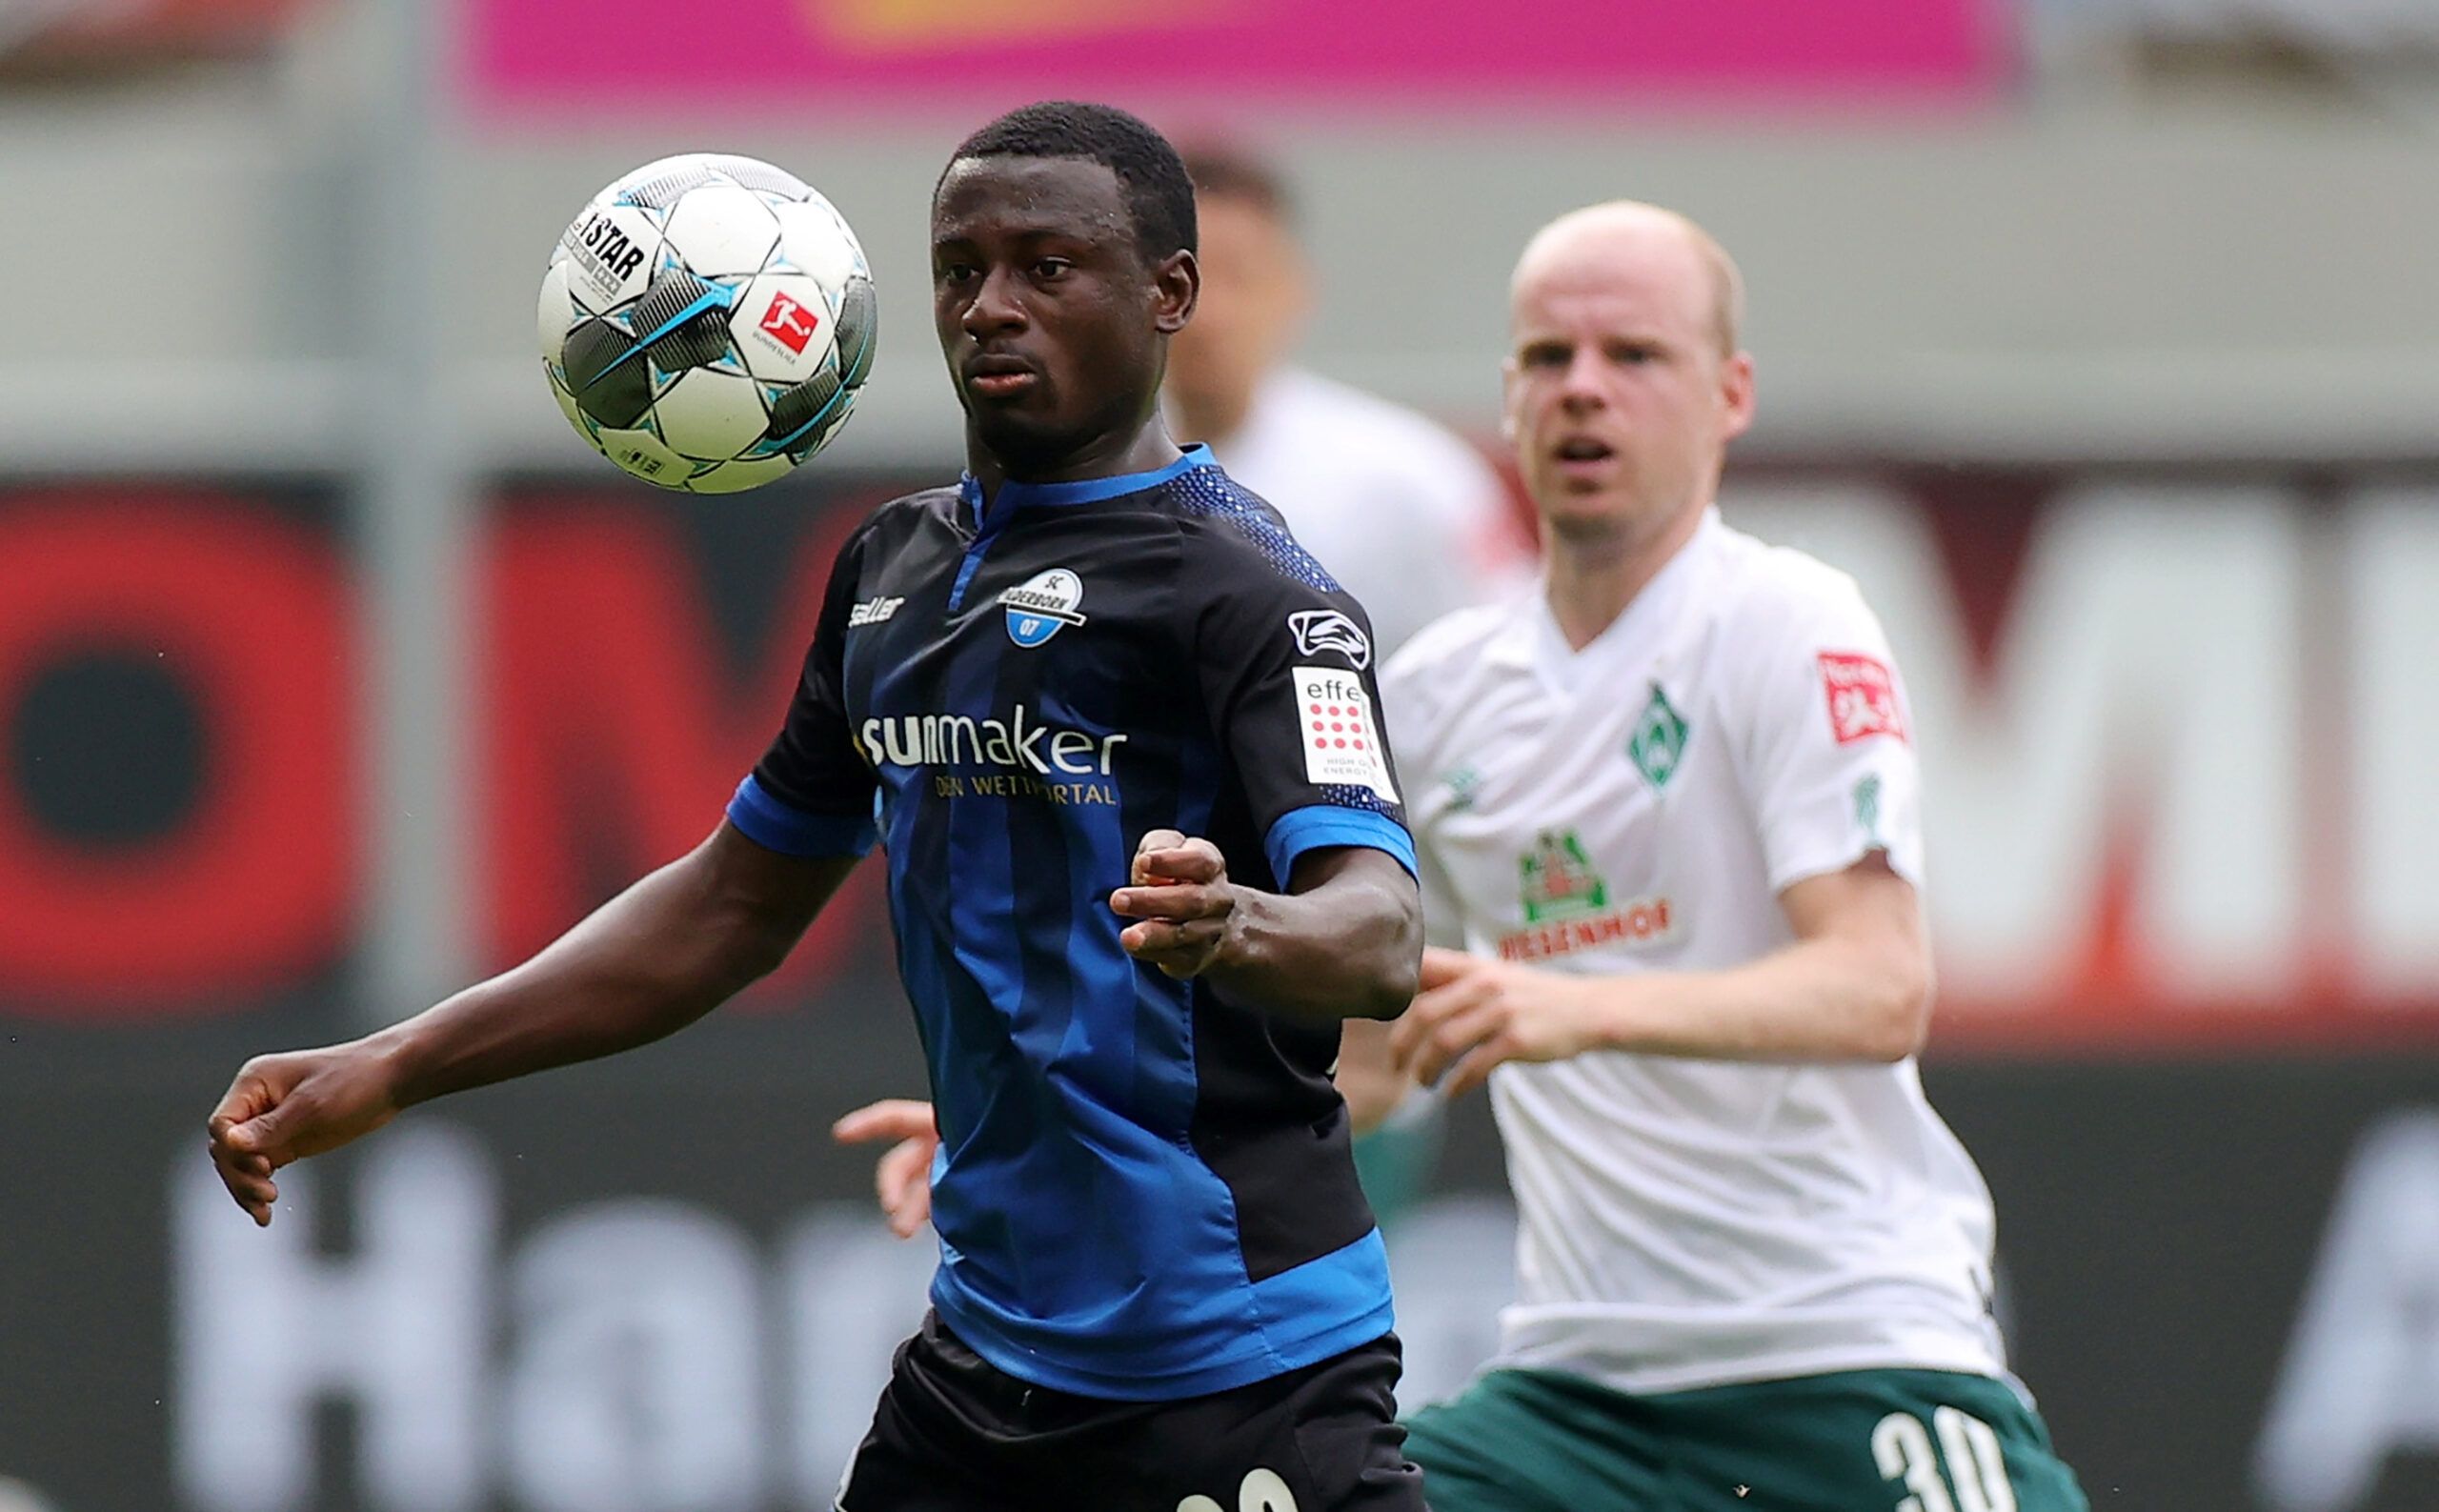 Soccer Football - Bundesliga - SC Paderborn v Werder Bremen - Benteler Arena, Paderborn, Germany - June 13, 2020 Werder Bremen's Davy Klaassen in action with Paderborn's Jamilu Collins, as play resumes behind closed doors following the outbreak of the coronavirus disease (COVID-19) Friedemann Vogel/Pool via REUTERS   DFL regulations prohibit any use of photographs as image sequences and/or quasi-video